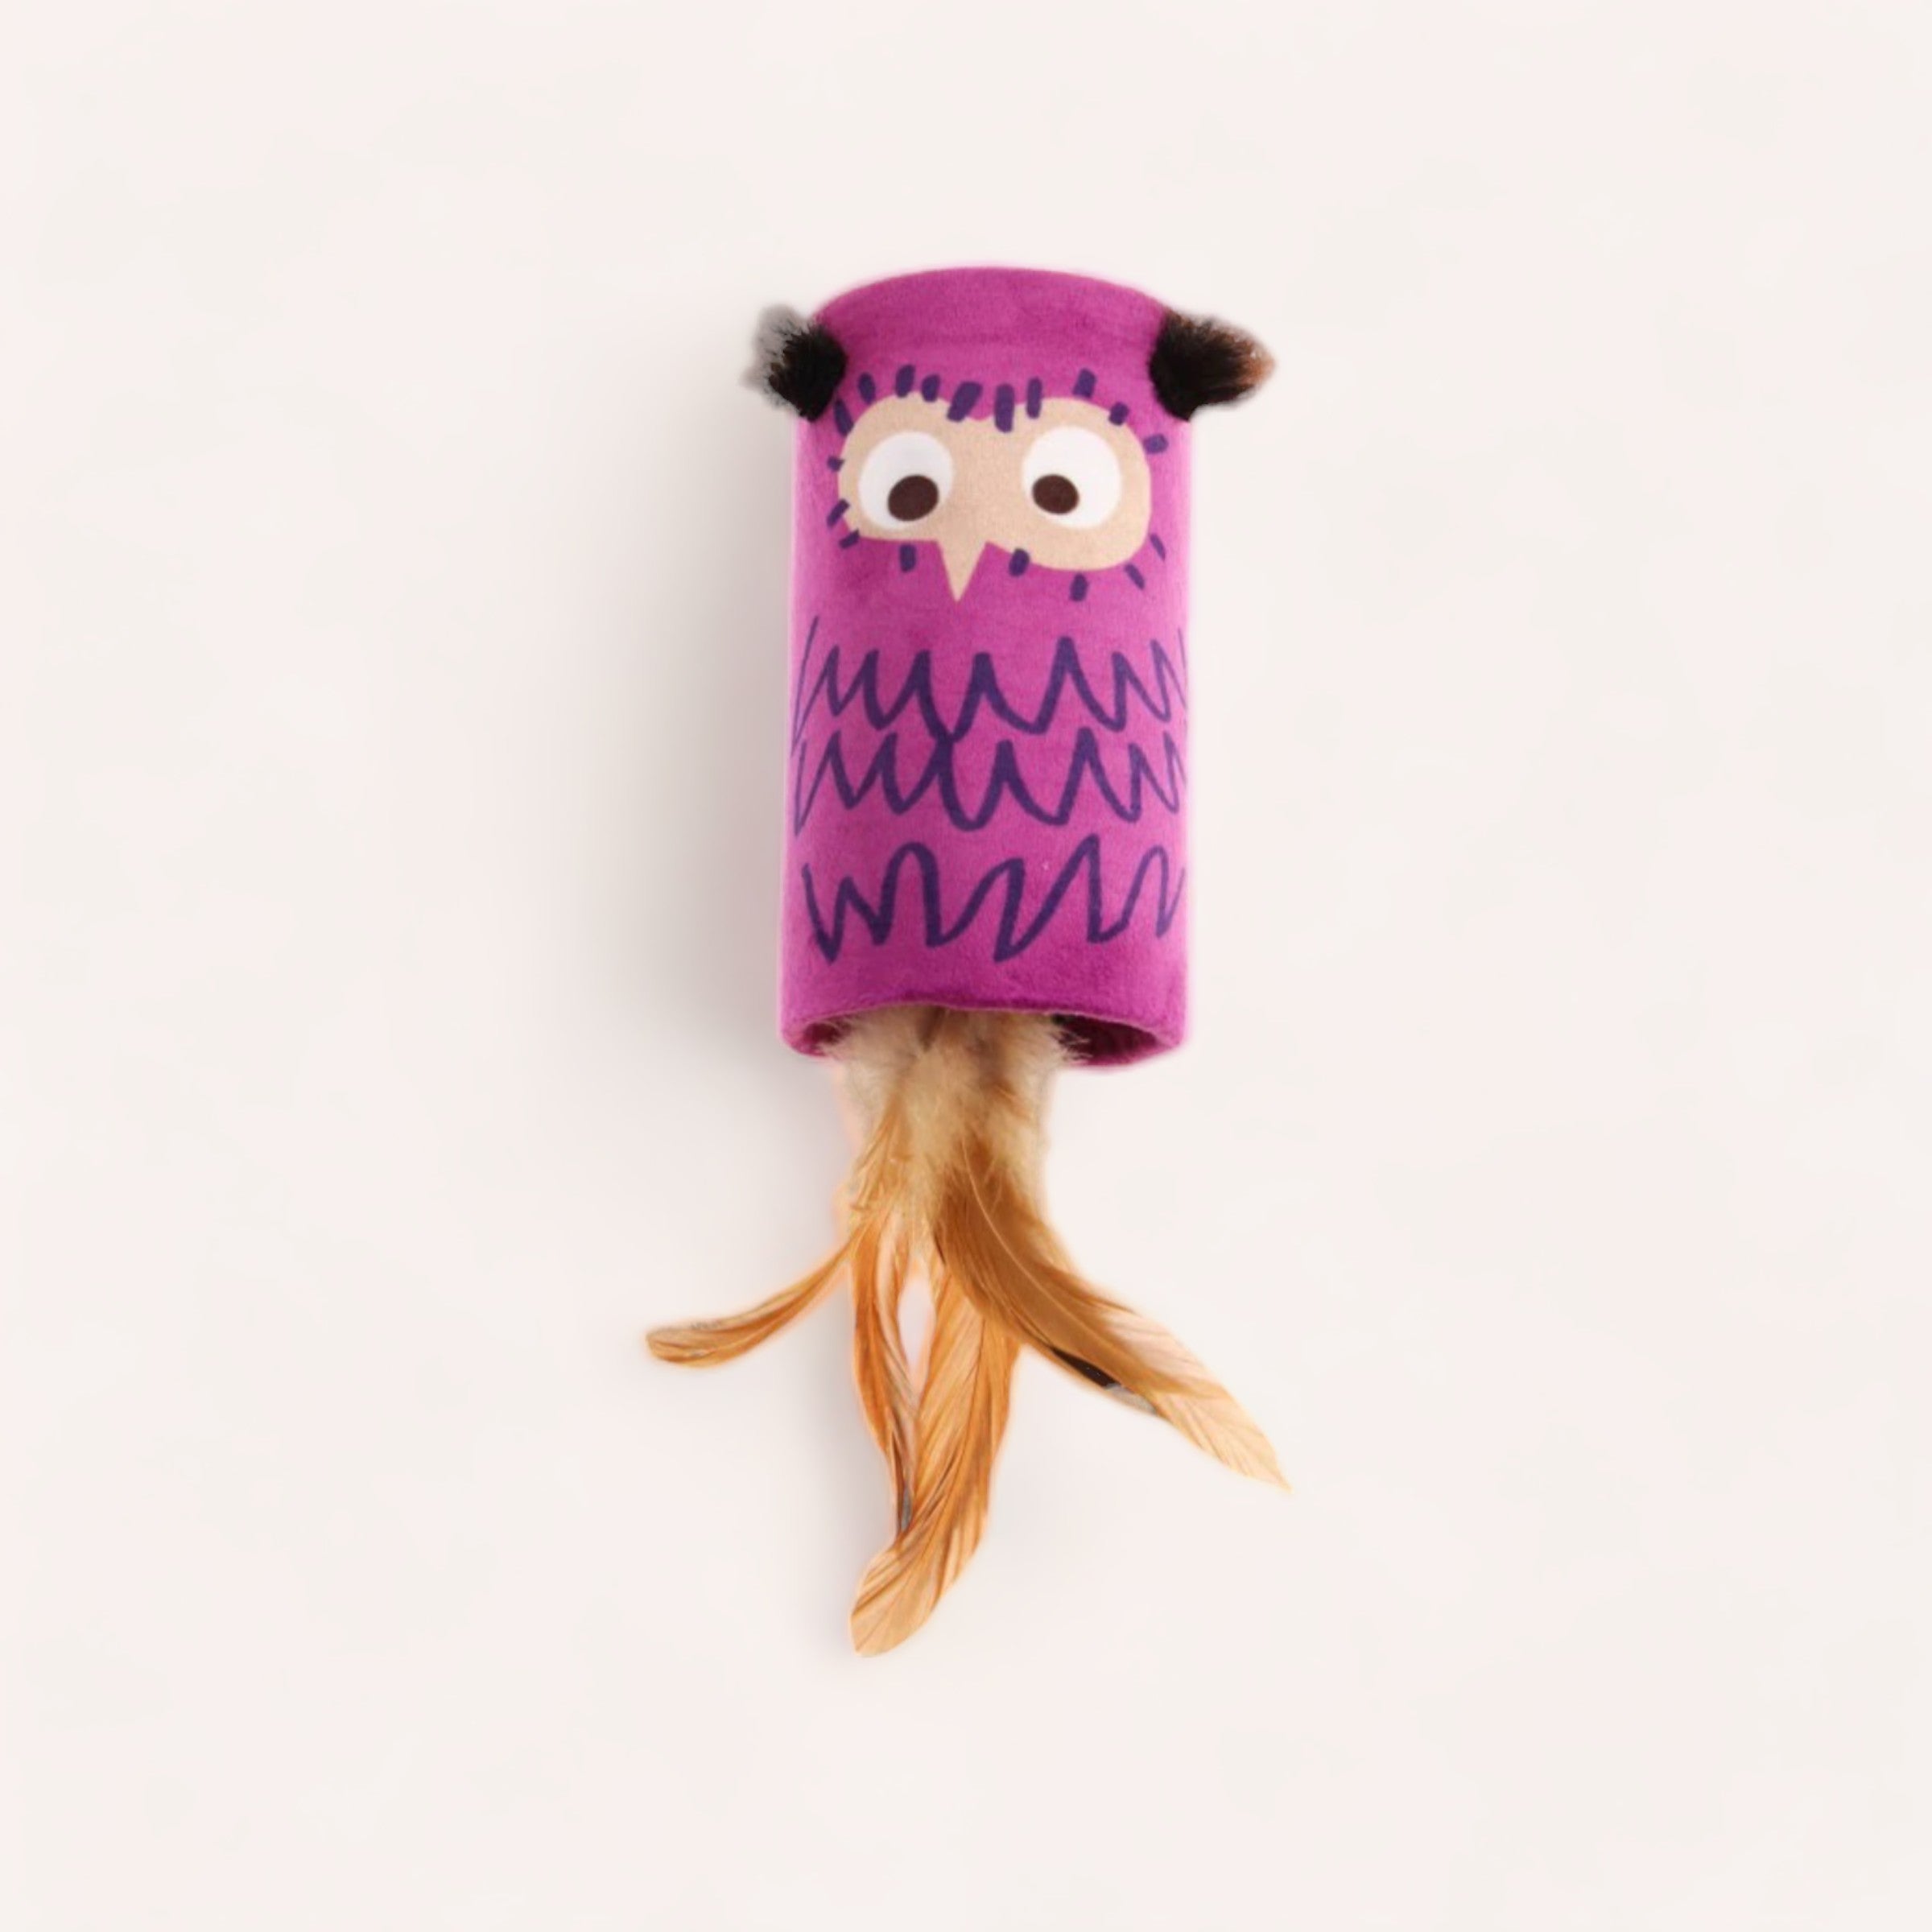 A colorful Owl Pet Toy by GiGwi with an owl-like face and a feathery tail, featuring a motion-activated sound chip, on a plain background by Wolves of Wellington.